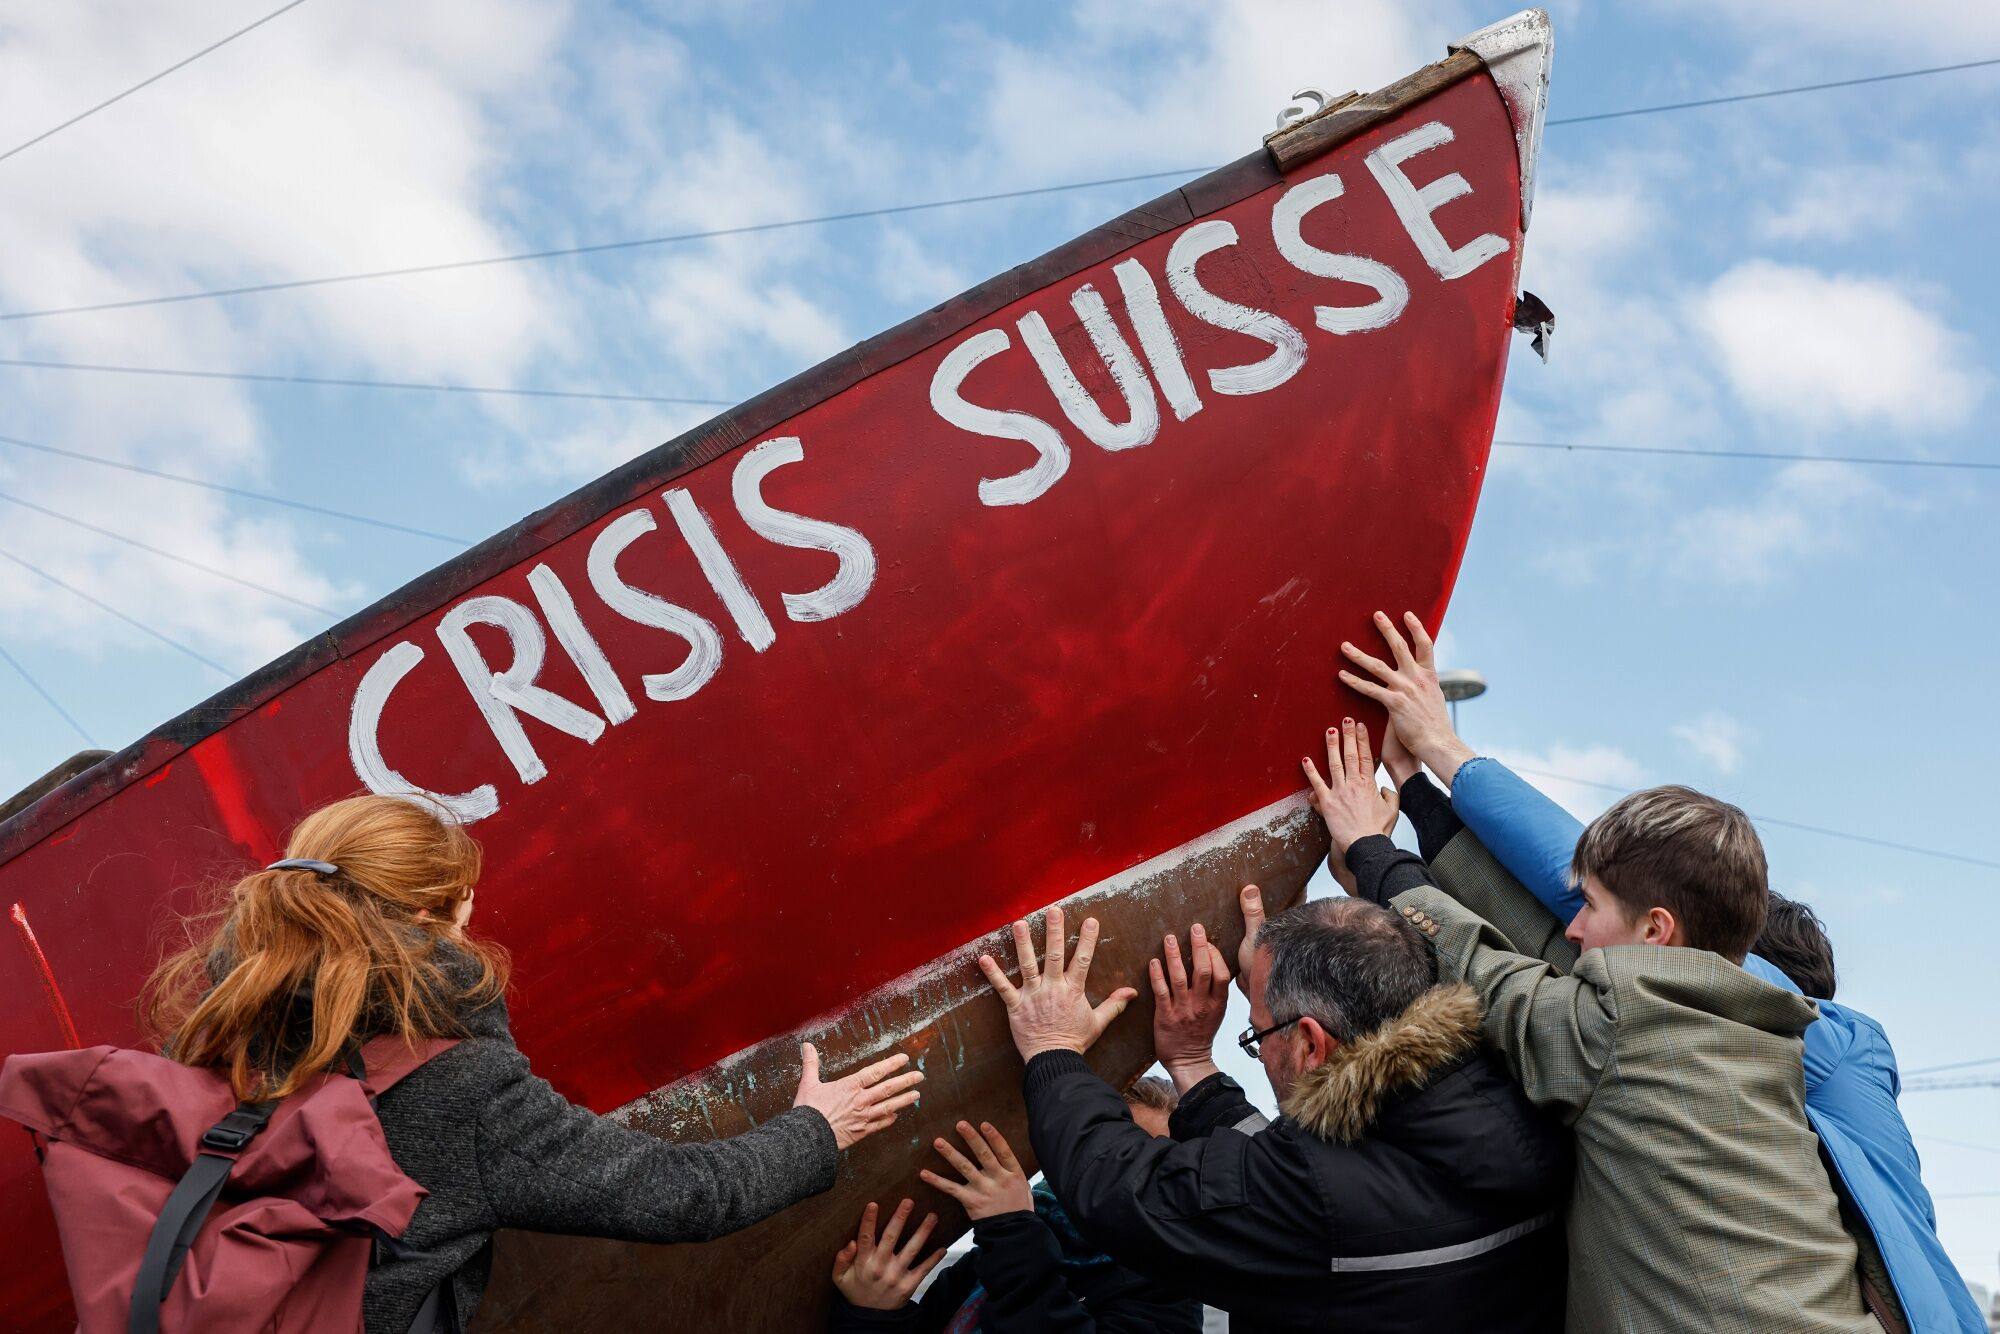 Protestors hold a boat reading ‘Crisis Suisse’ during a demonstration outside the Credit Suisse Group annual general meeting of shareholders in Zurich on April 4. Credit Suisse faced imminent failure if it was not sold to UBS Group in an emergency rescue last month, according to the Swiss central bank. Photo: Bloomberg